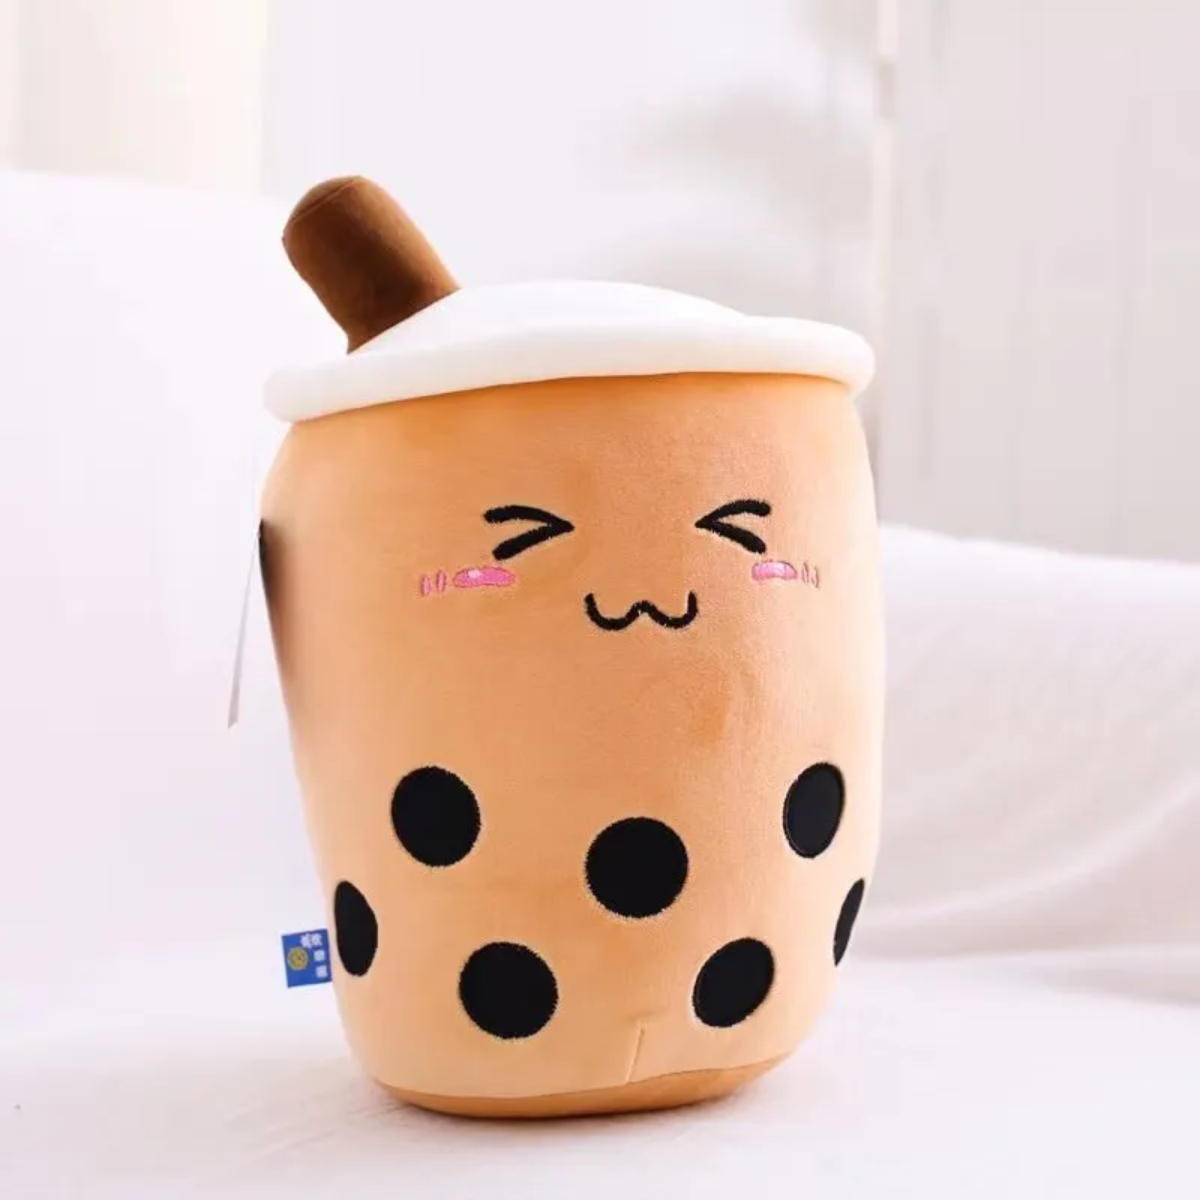 Boba Bubble Tea Bliss Pillow – 24cm of Cuddly, Cheery Comfort!